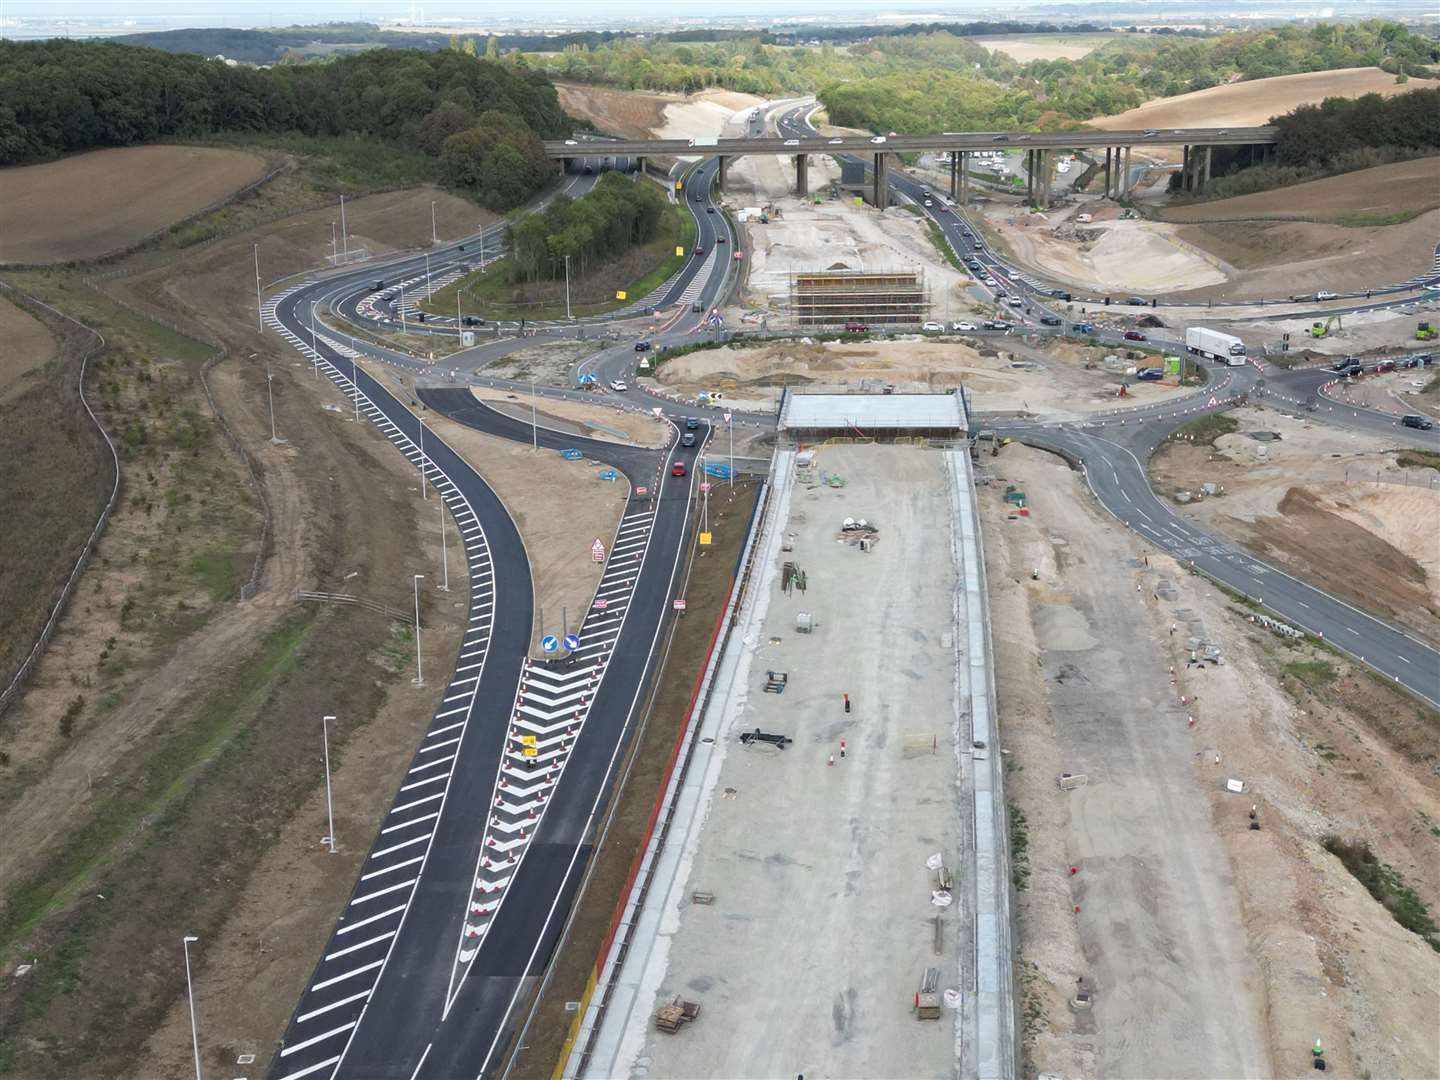 Drone photos of the roadworks at Stockbury roundabout / M2. Picture: Barry Goodwin